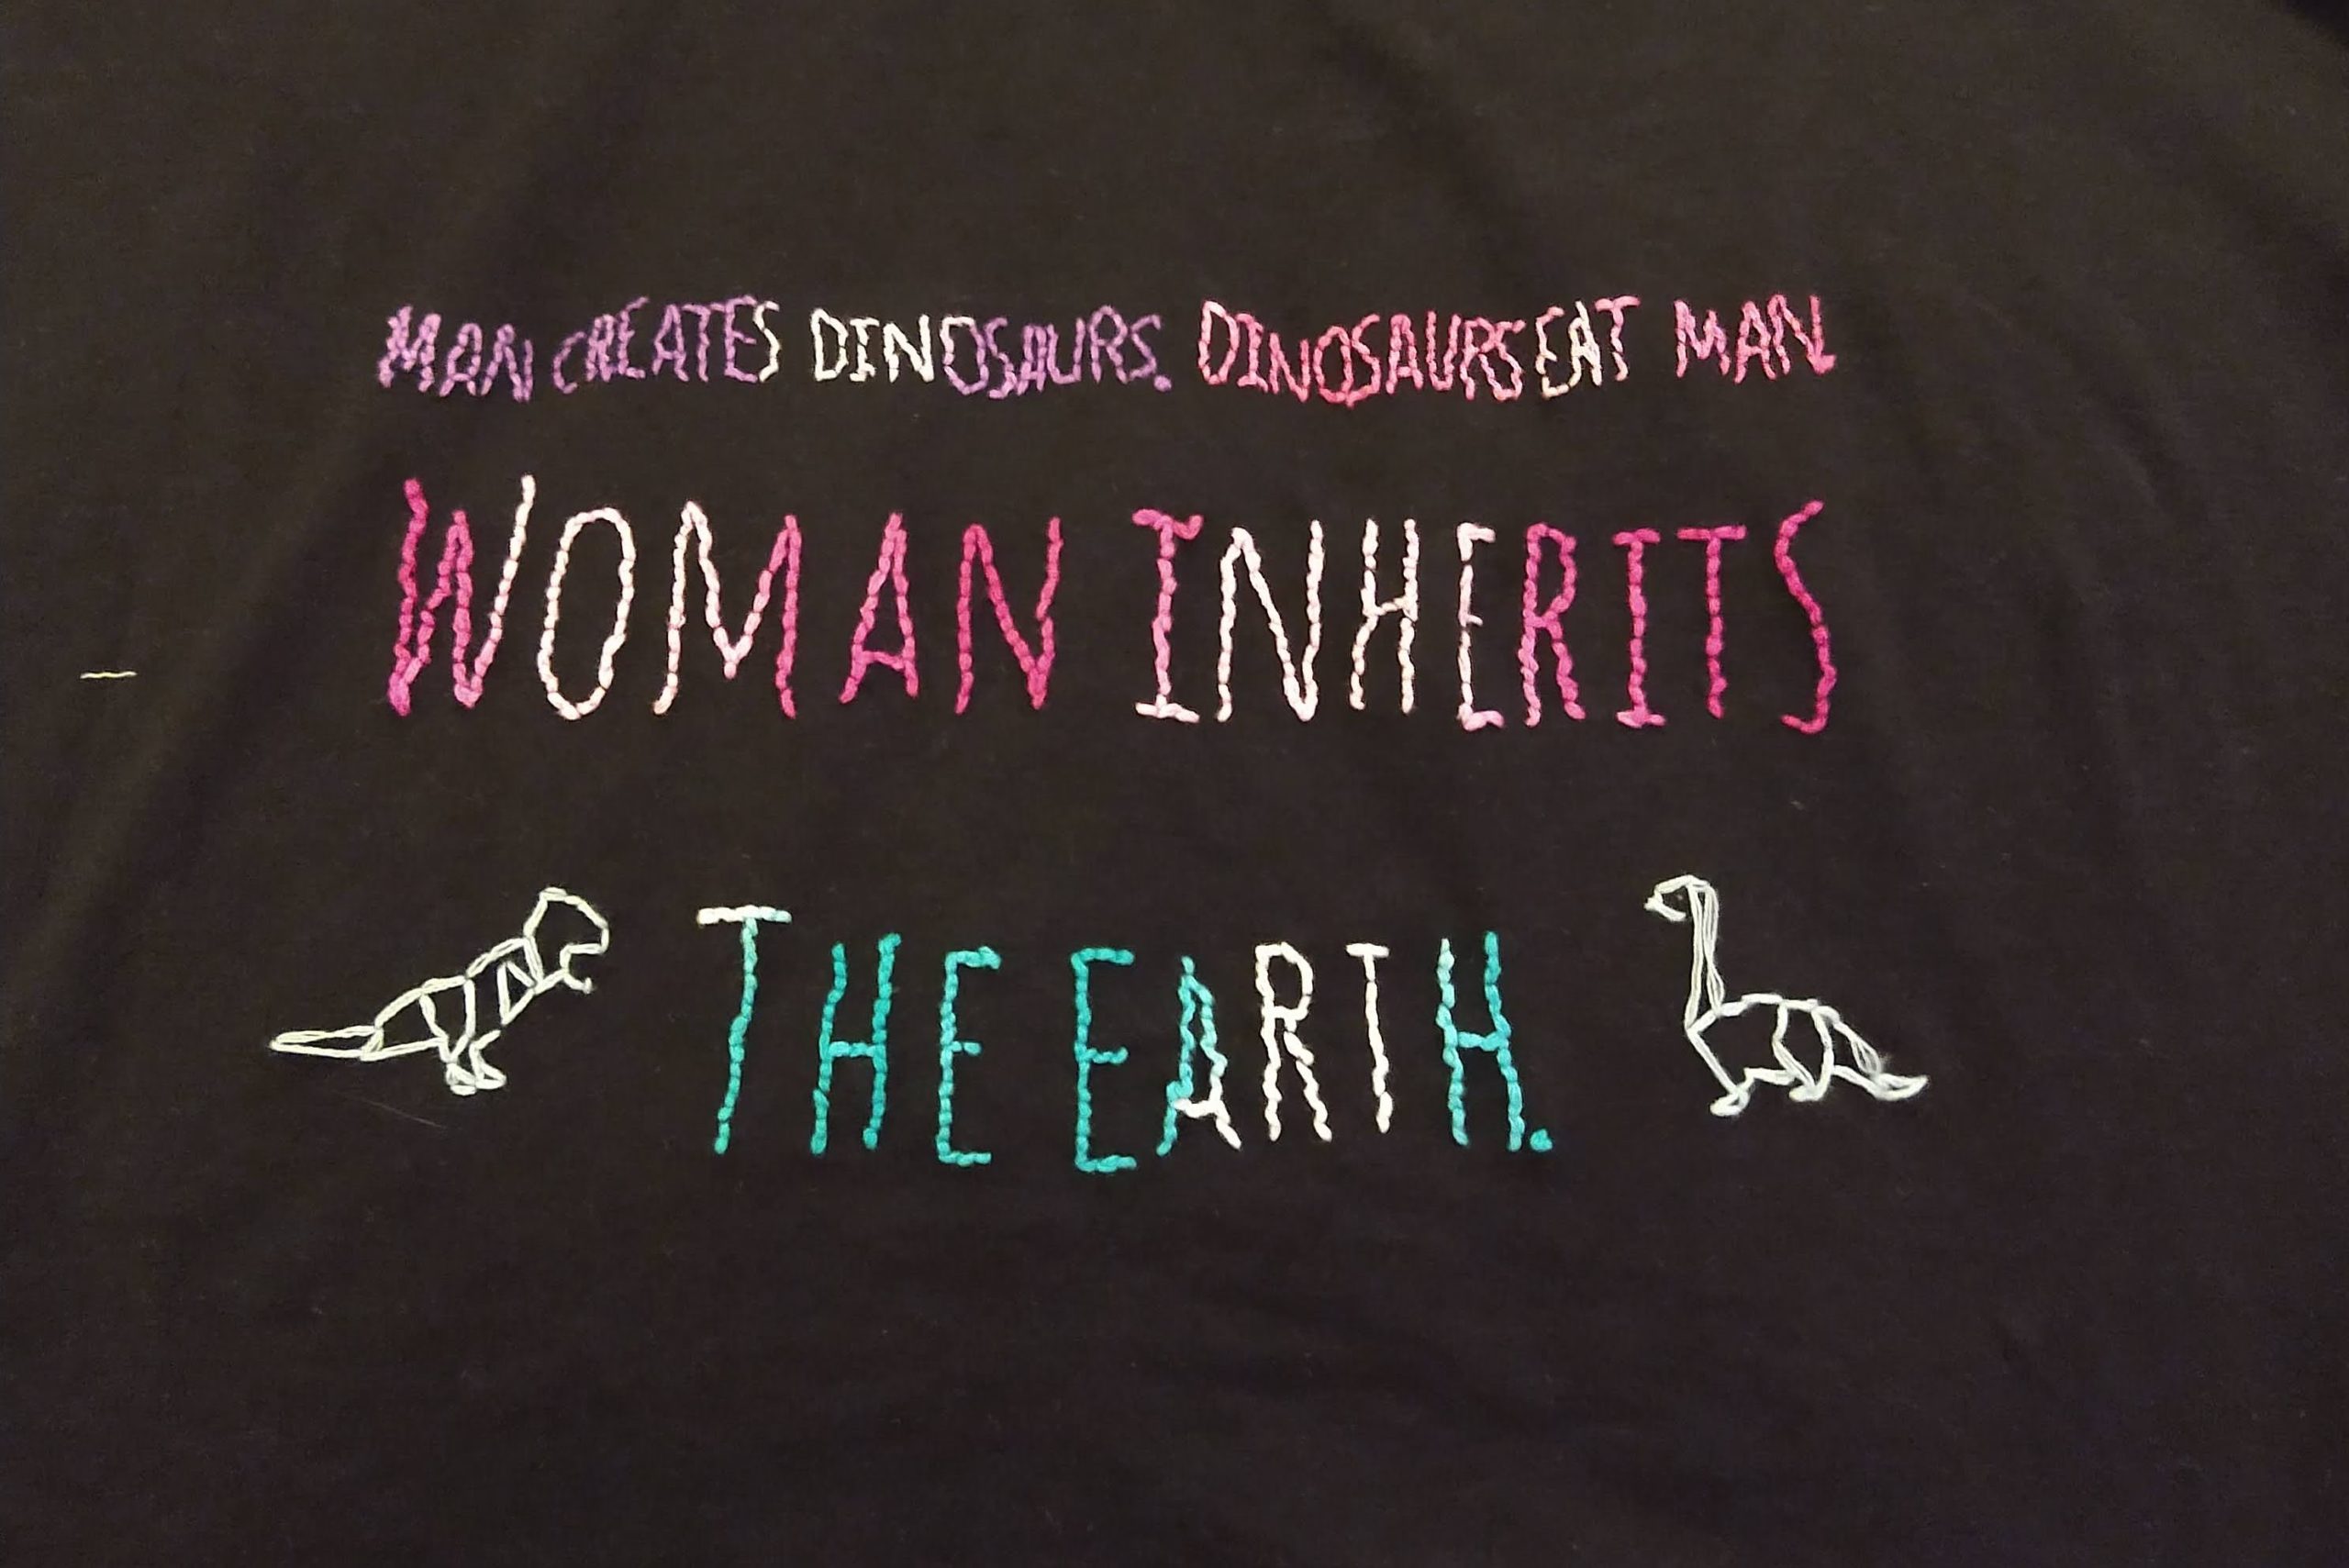 A black tshirt with ombre lettering read man creates dinosaurs, b=dinosaurs eat man, women inherit the earth. with two small dinosaurs.